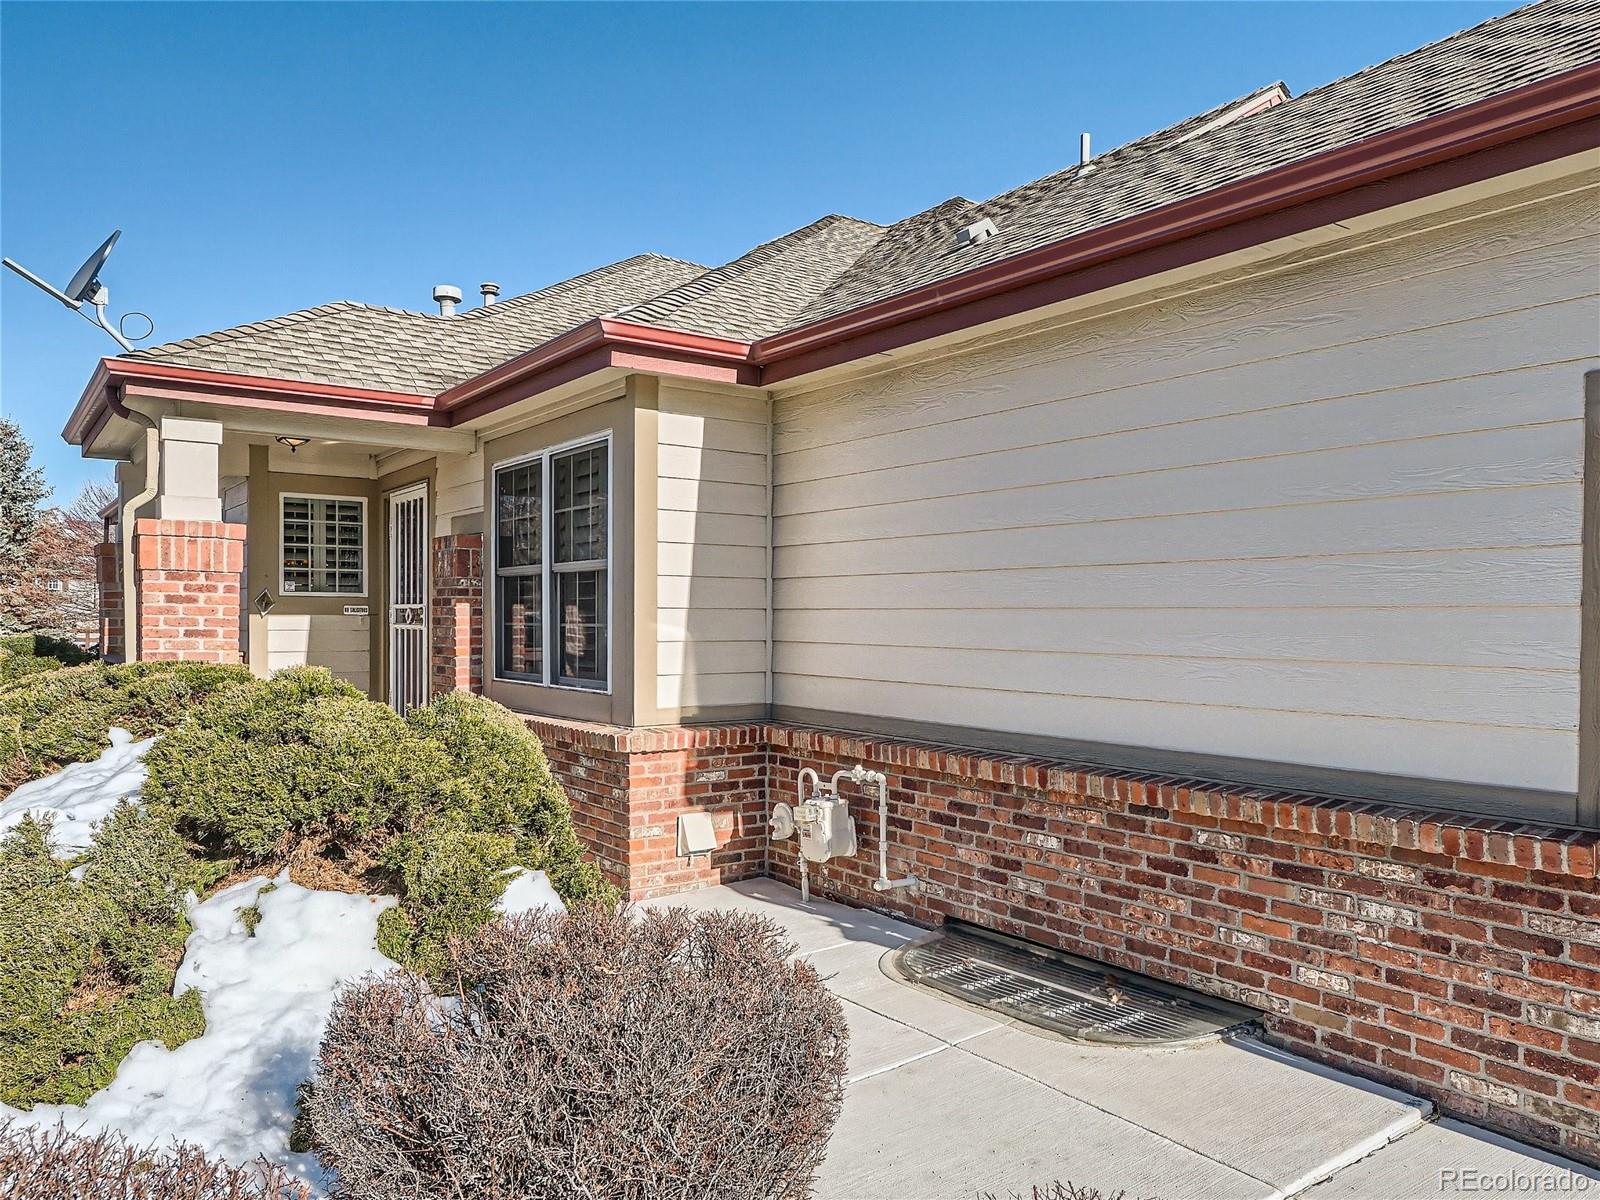 6163  terry court, Arvada sold home. Closed on 2024-04-23 for $665,000.